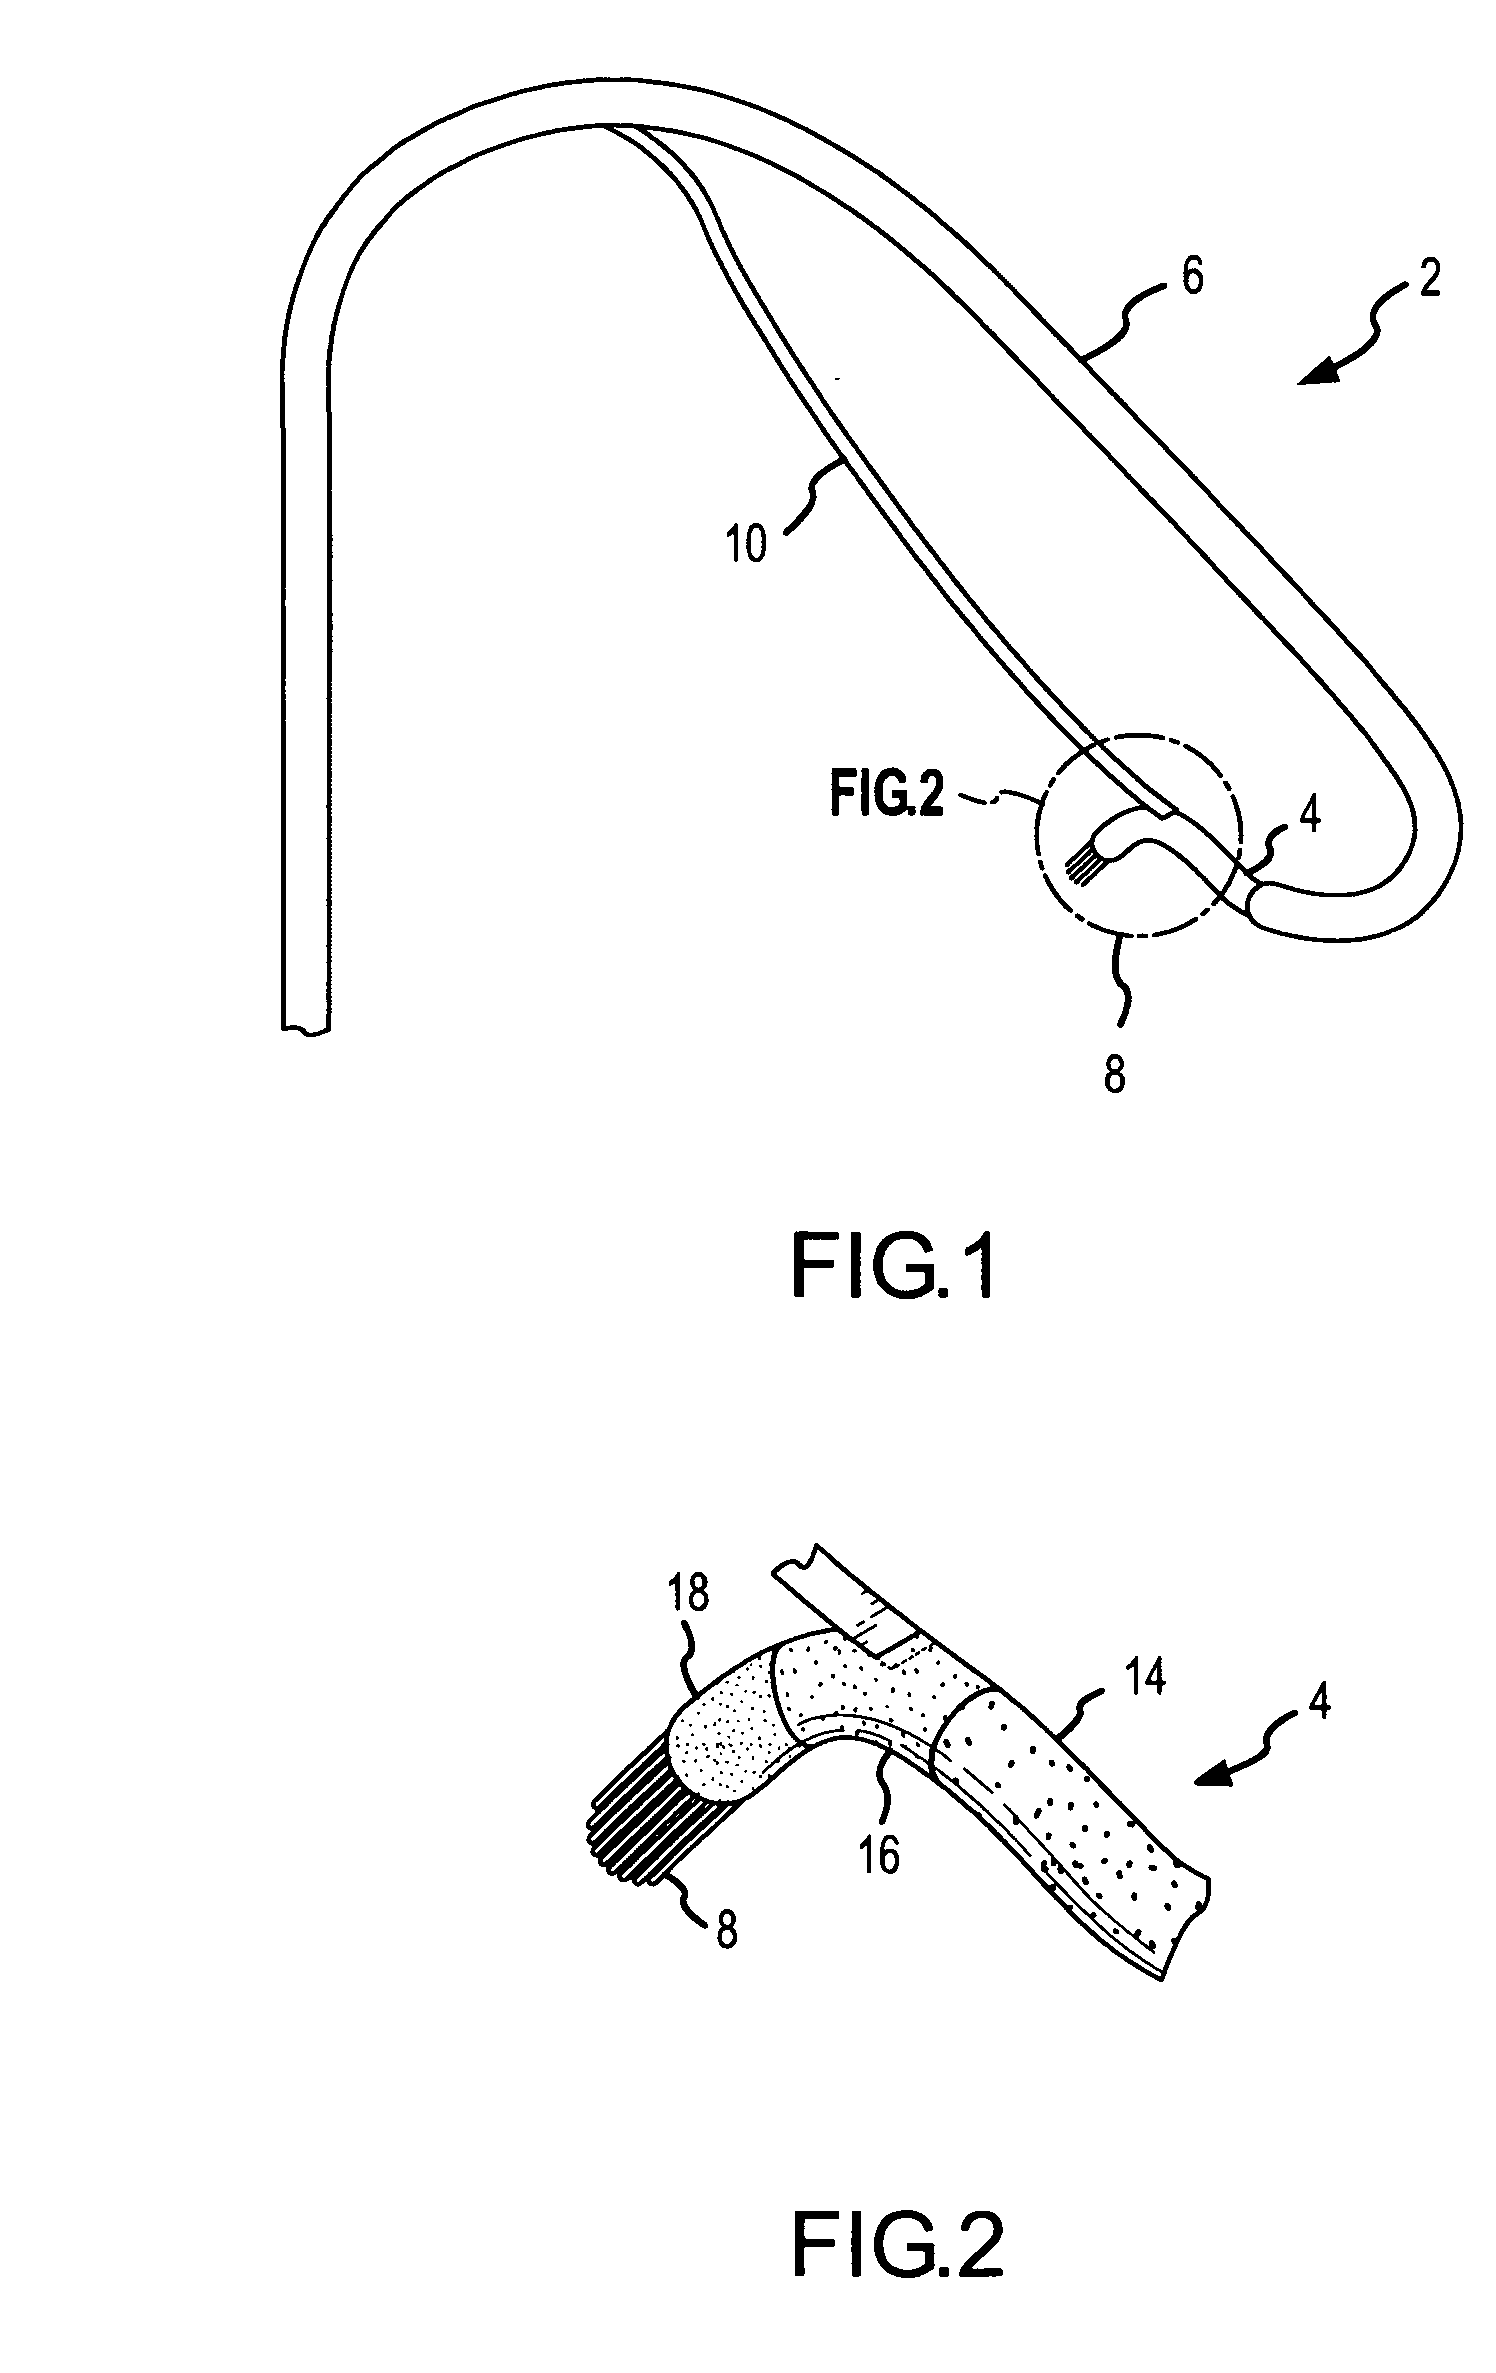 Catheter electrode and rail system for cardiac ablation